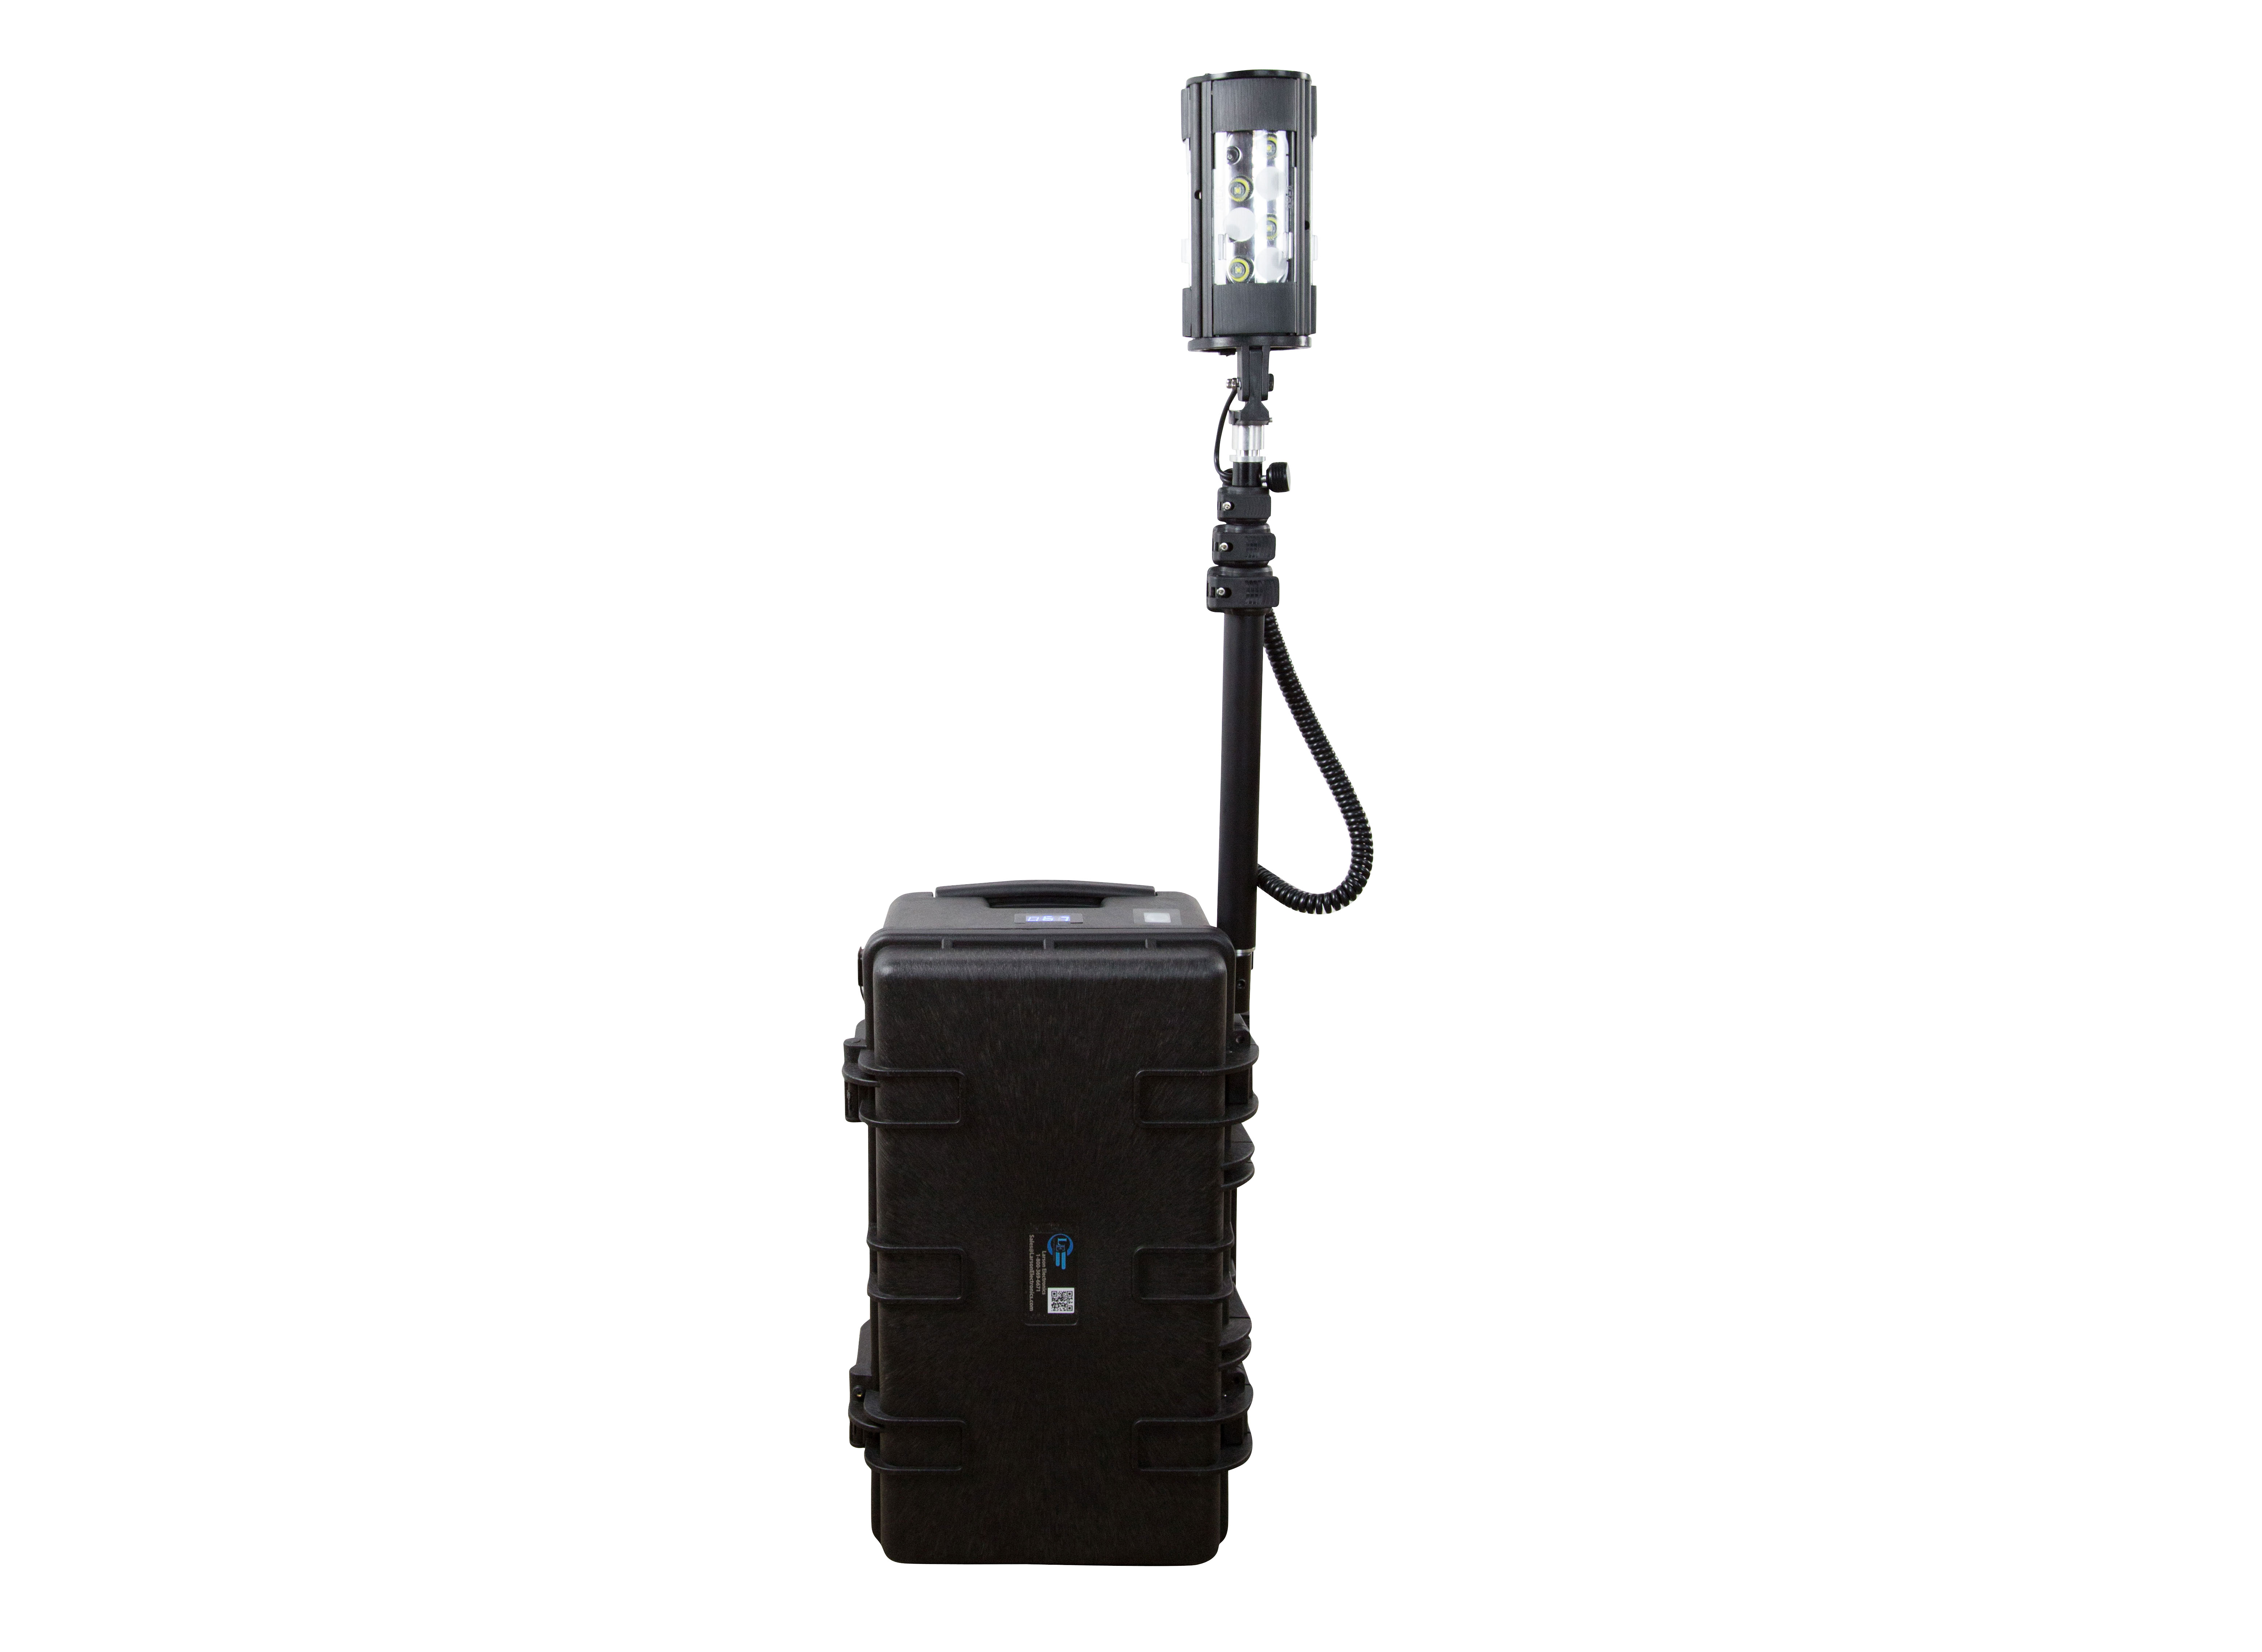 Portable LED Work Light Powered by a Lithium-Ion Battery Pack